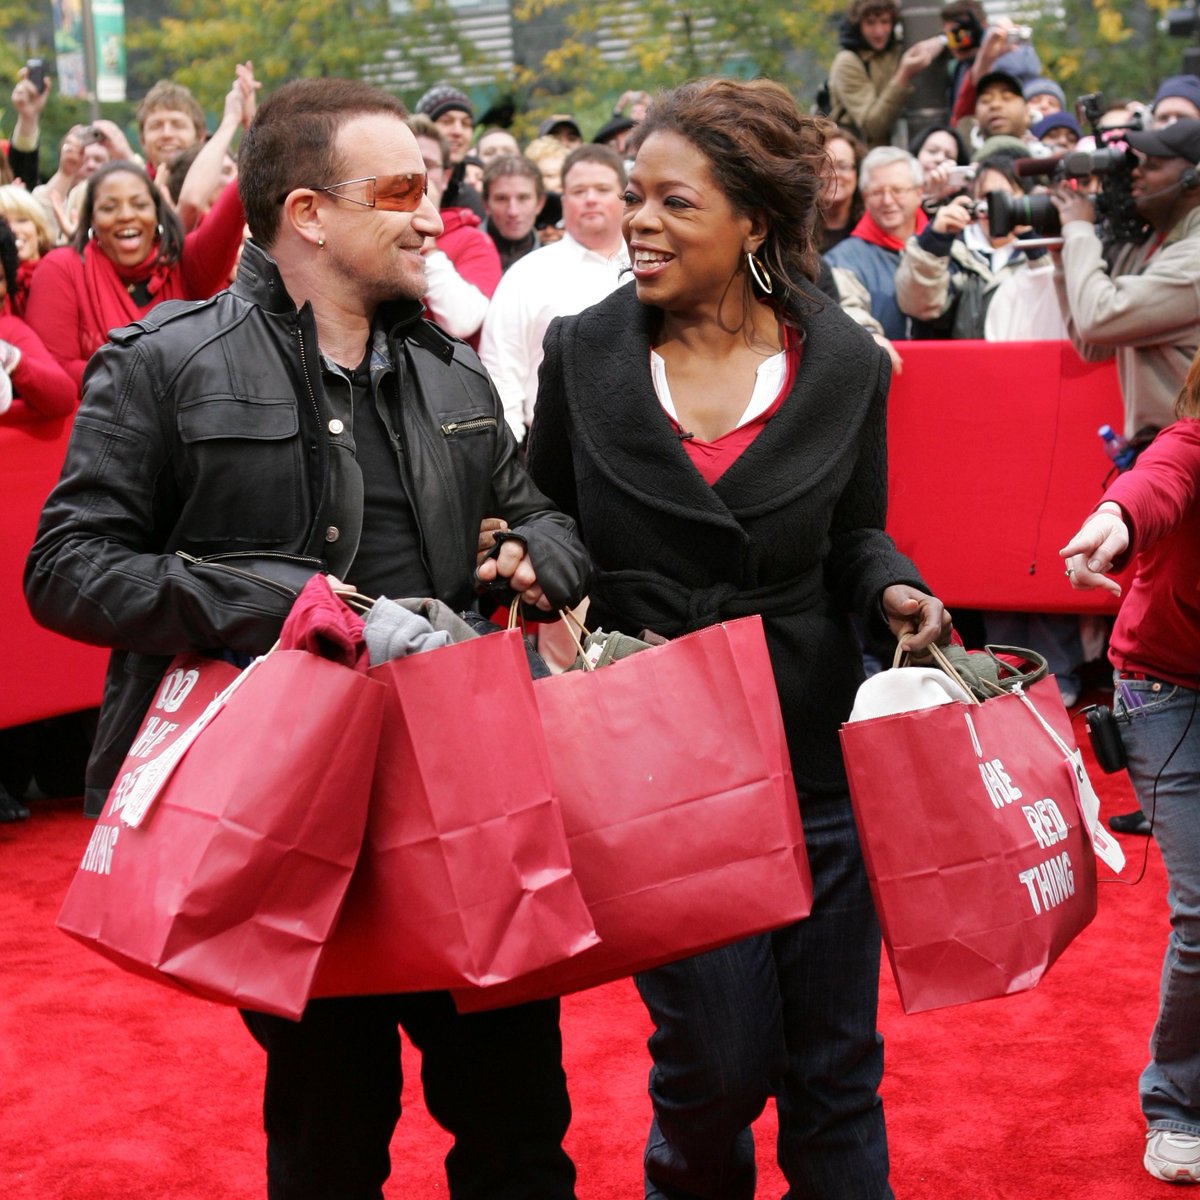 16 years ago this week, Bono and @Oprah helped kick off (RED)'s fight against AIDS and the inequities that allow it to thrive.